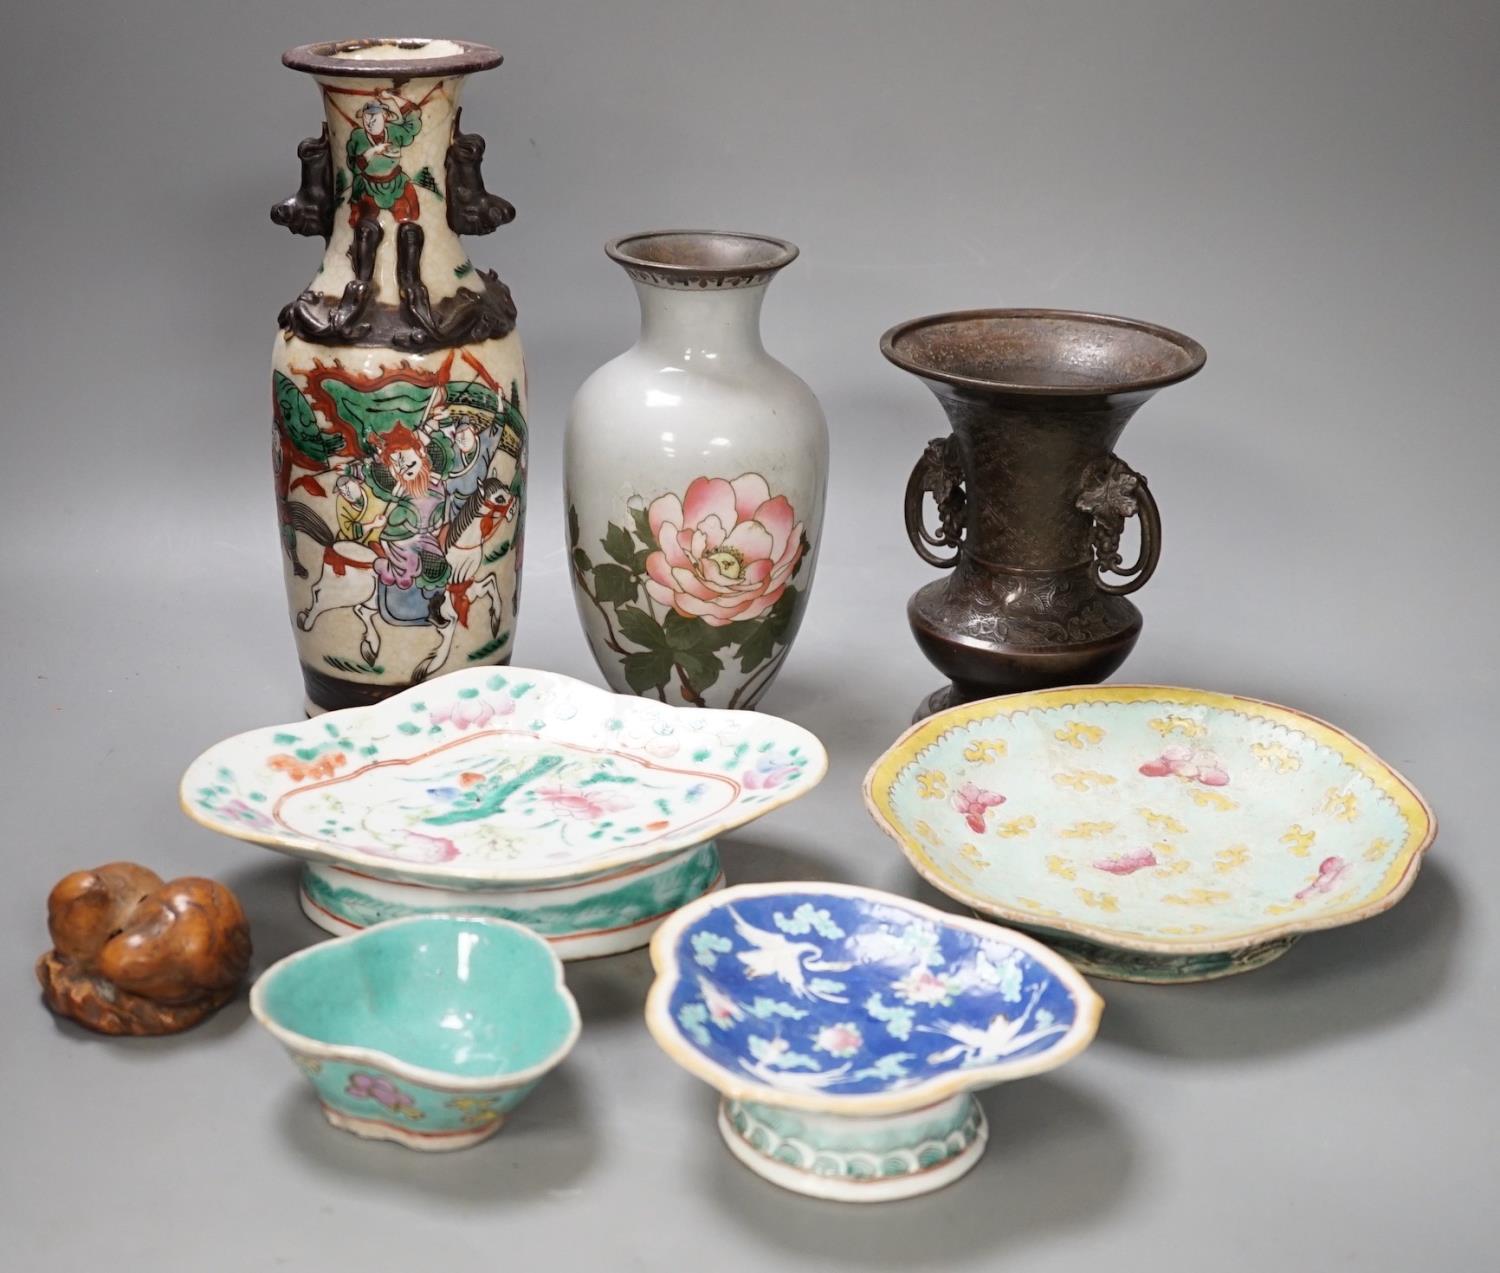 A group of 19th century Chinese porcelain dishes and a vase, and a Japanese ‘bird’ carving etc. - Image 6 of 17